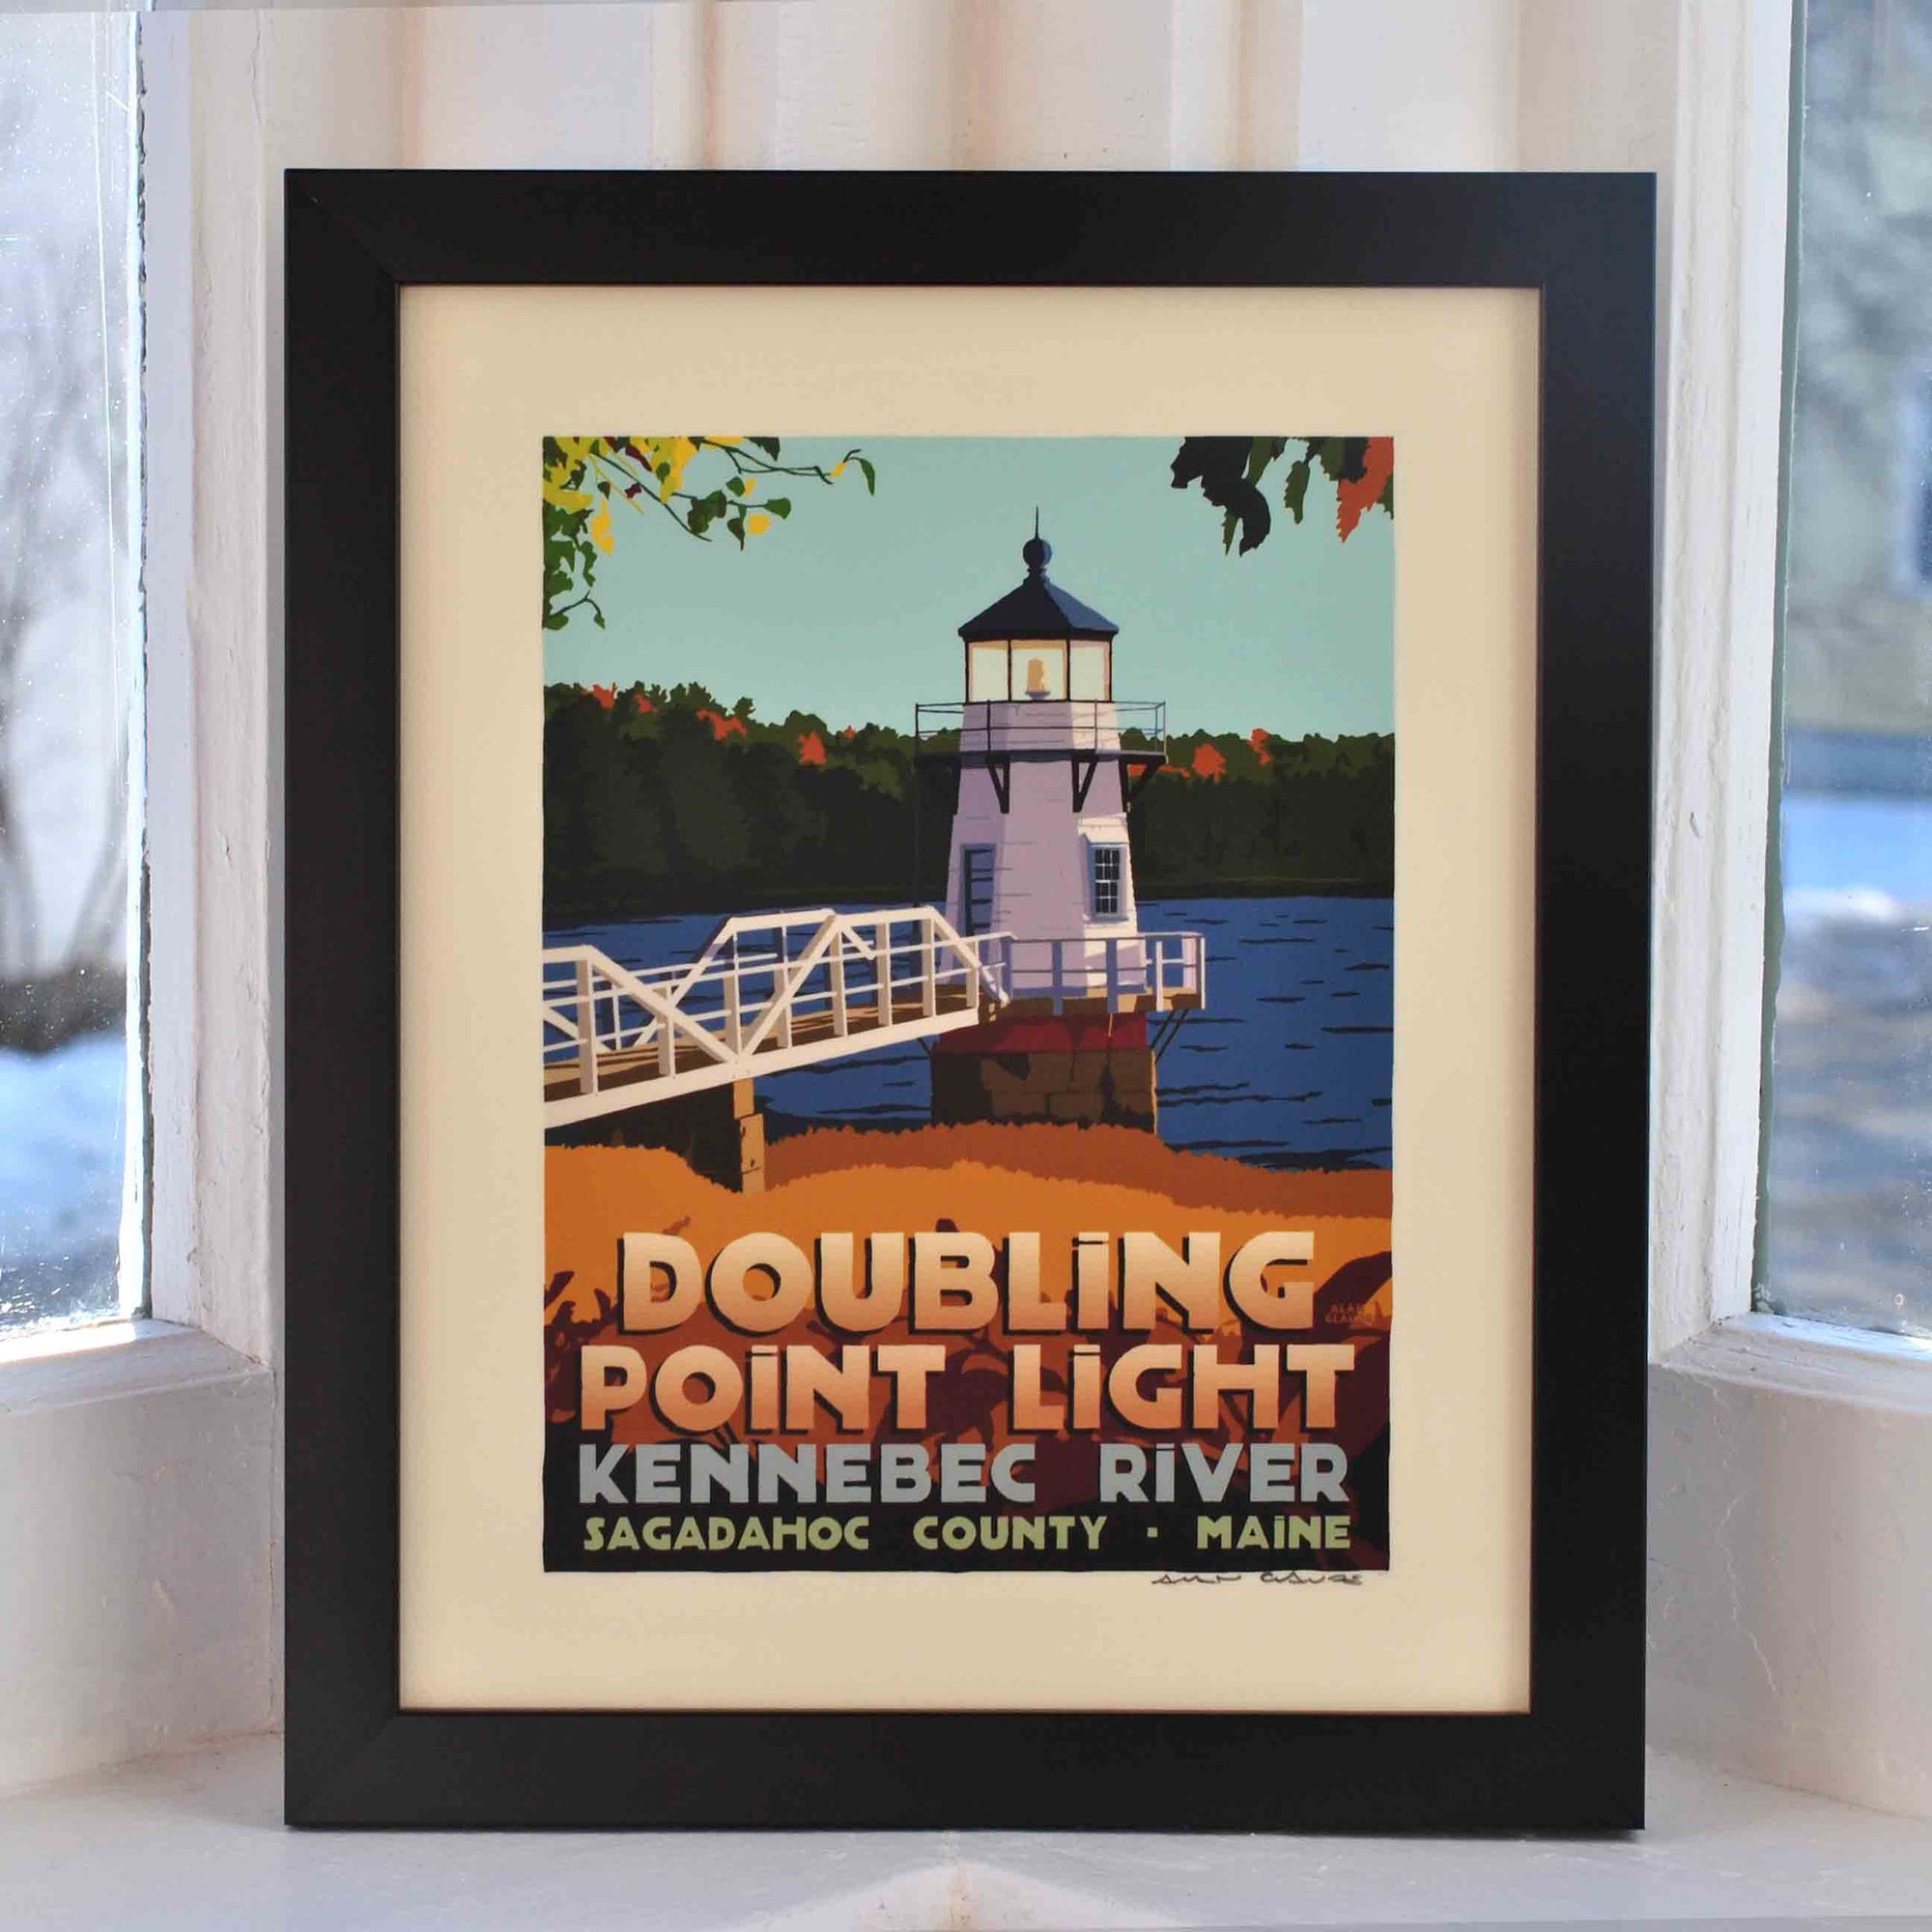 Doubling Point Light Art Print 8" x 10" Framed Travel Poster By Alan Claude - Maine